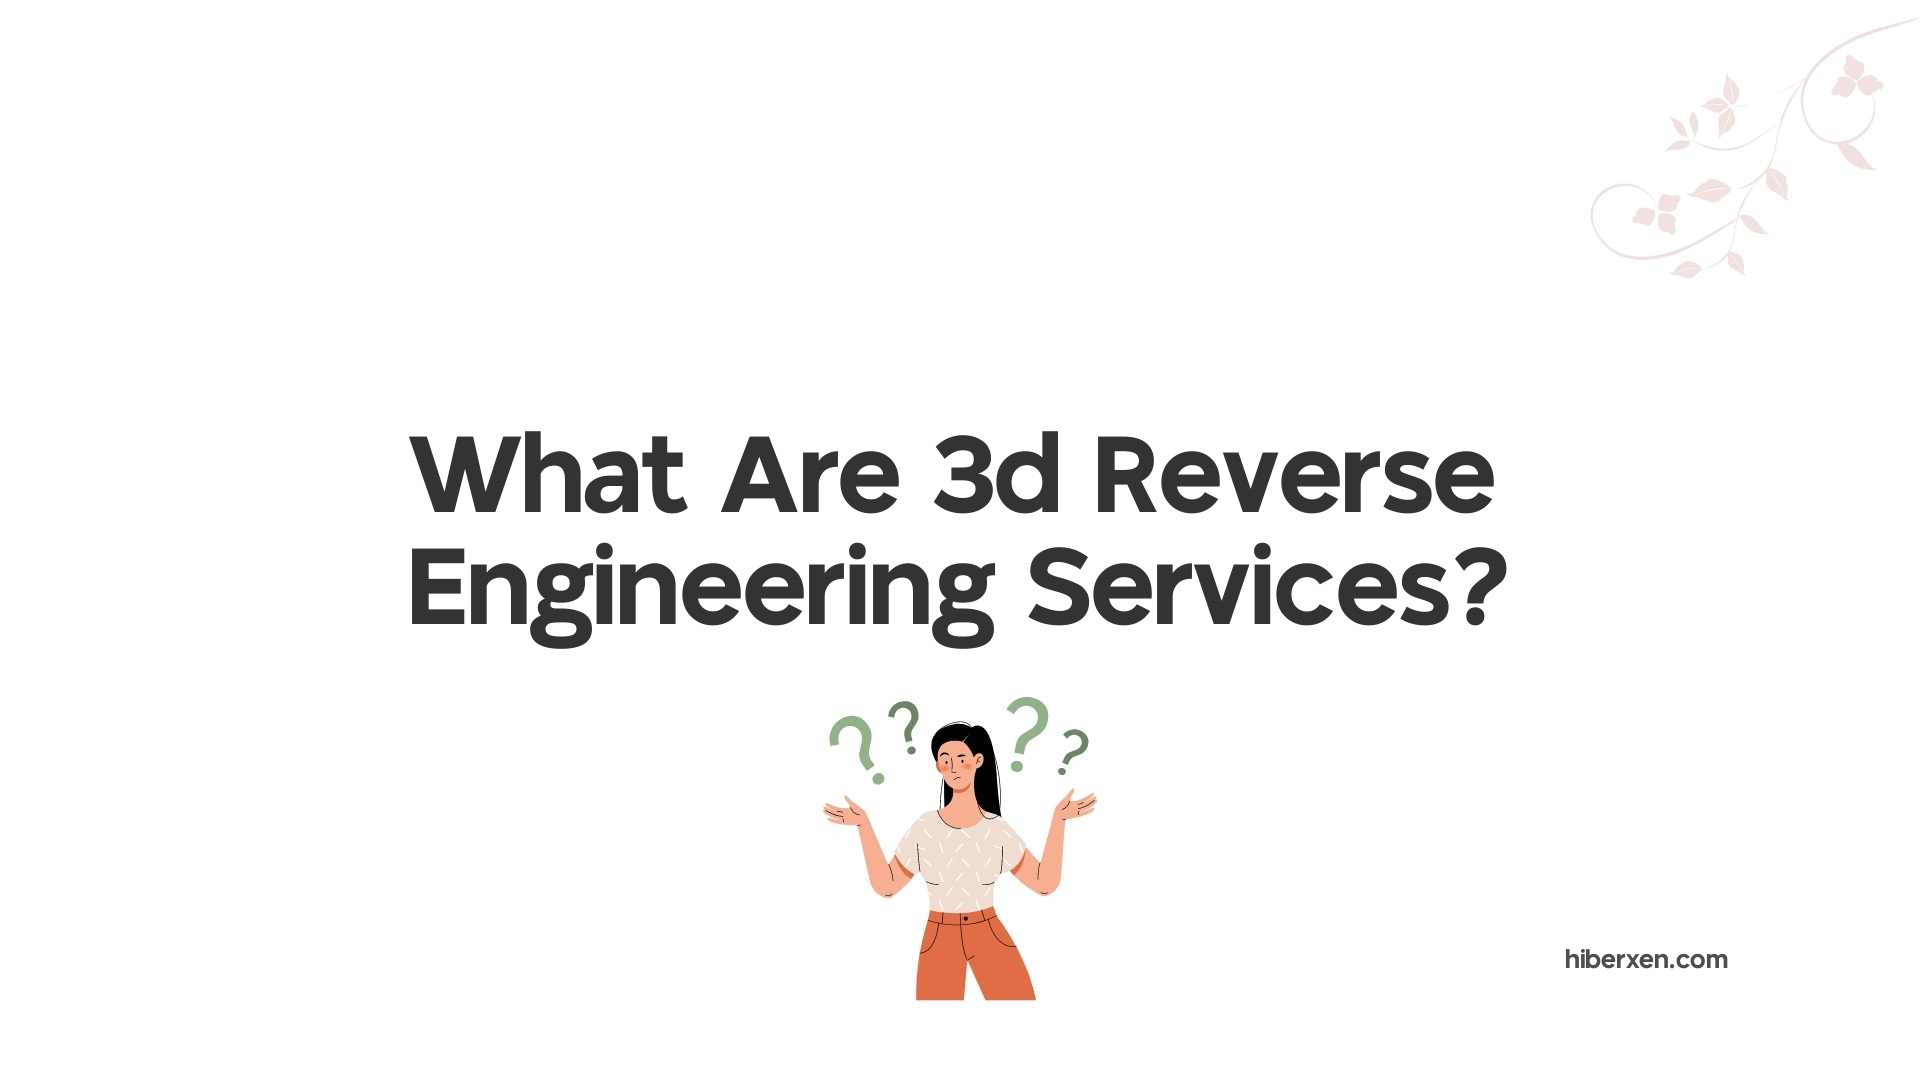 What Are 3d Reverse Engineering Services?